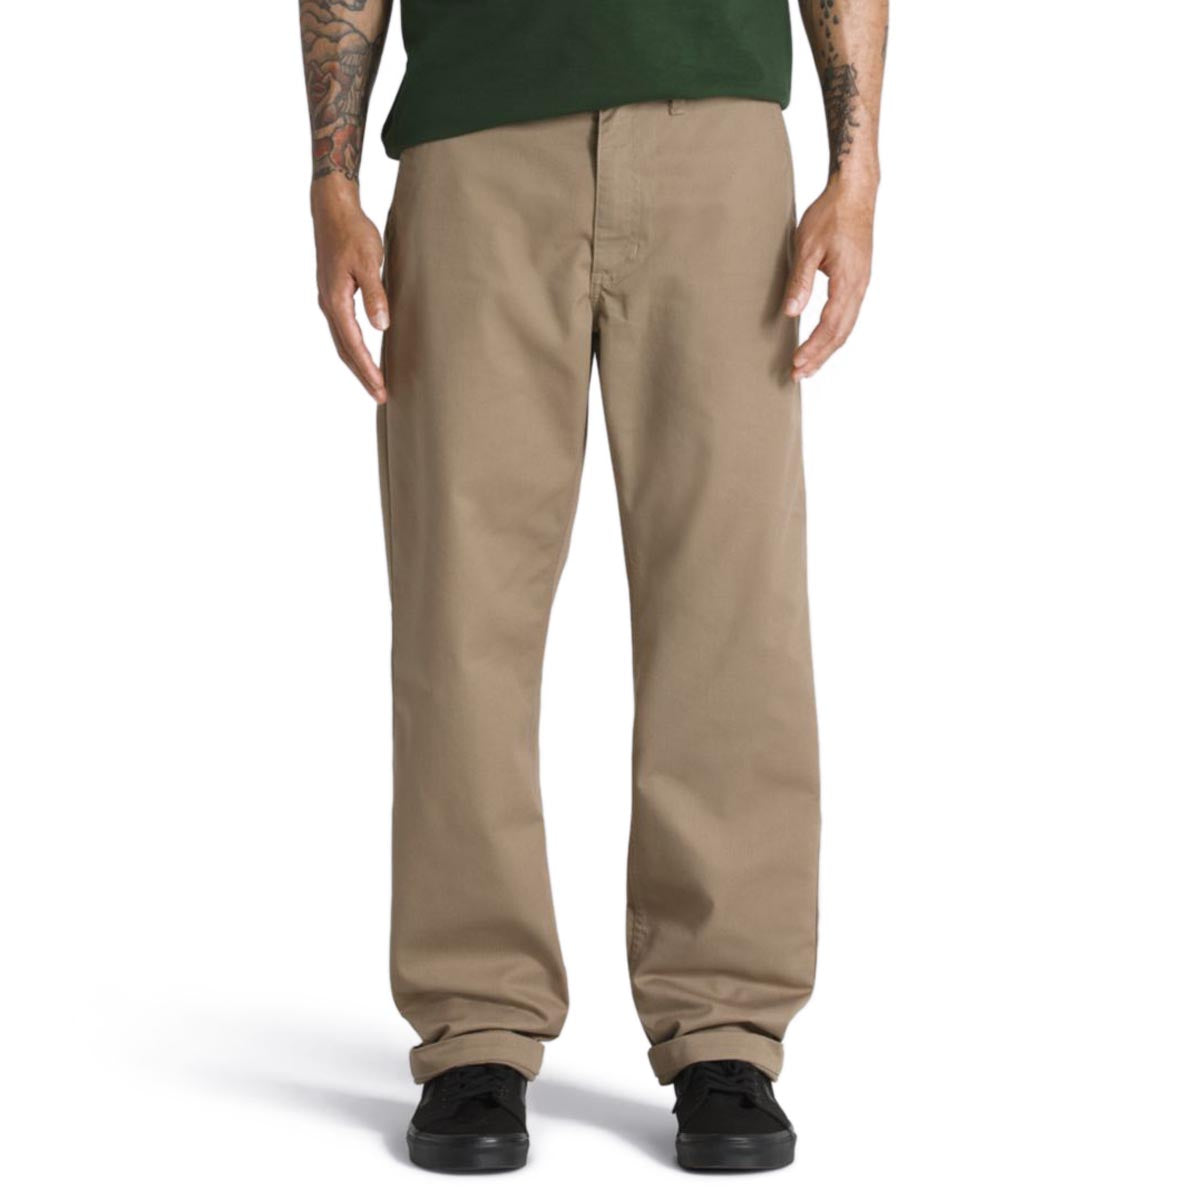 Vans Authentic Chino Relaxed Pants - Desert Taupe image 1